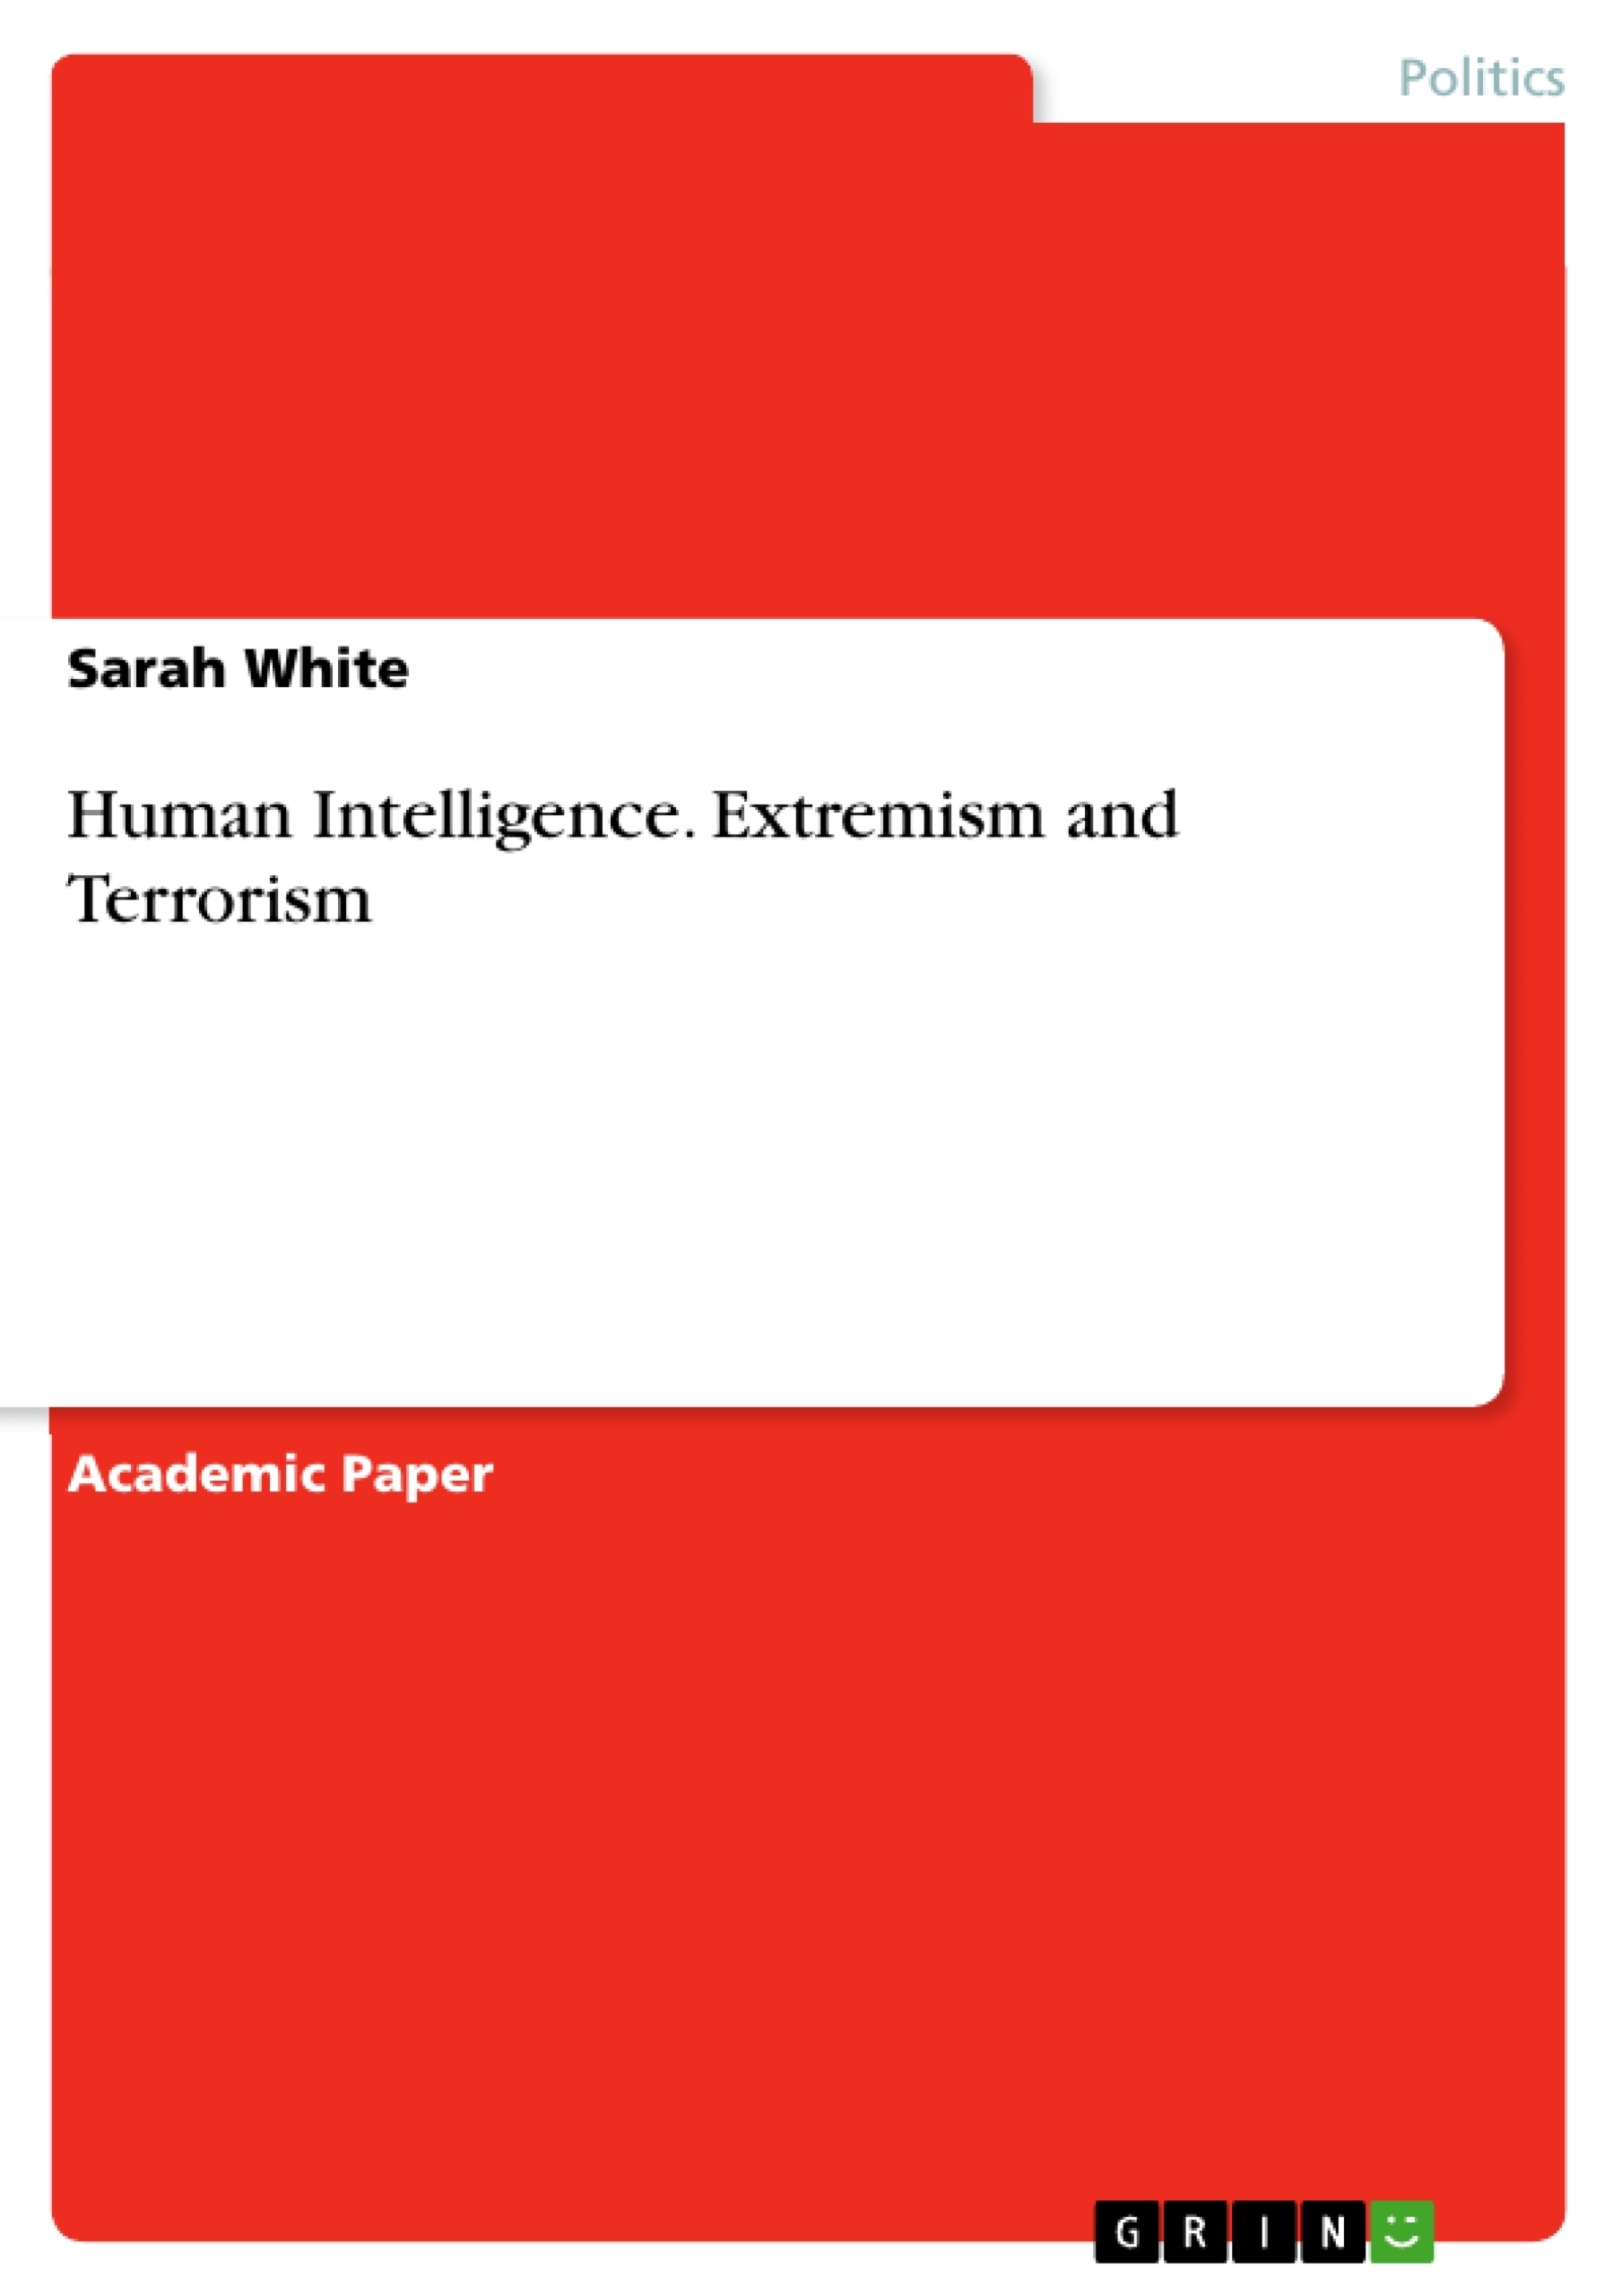 Título: Human Intelligence. Extremism and Terrorism